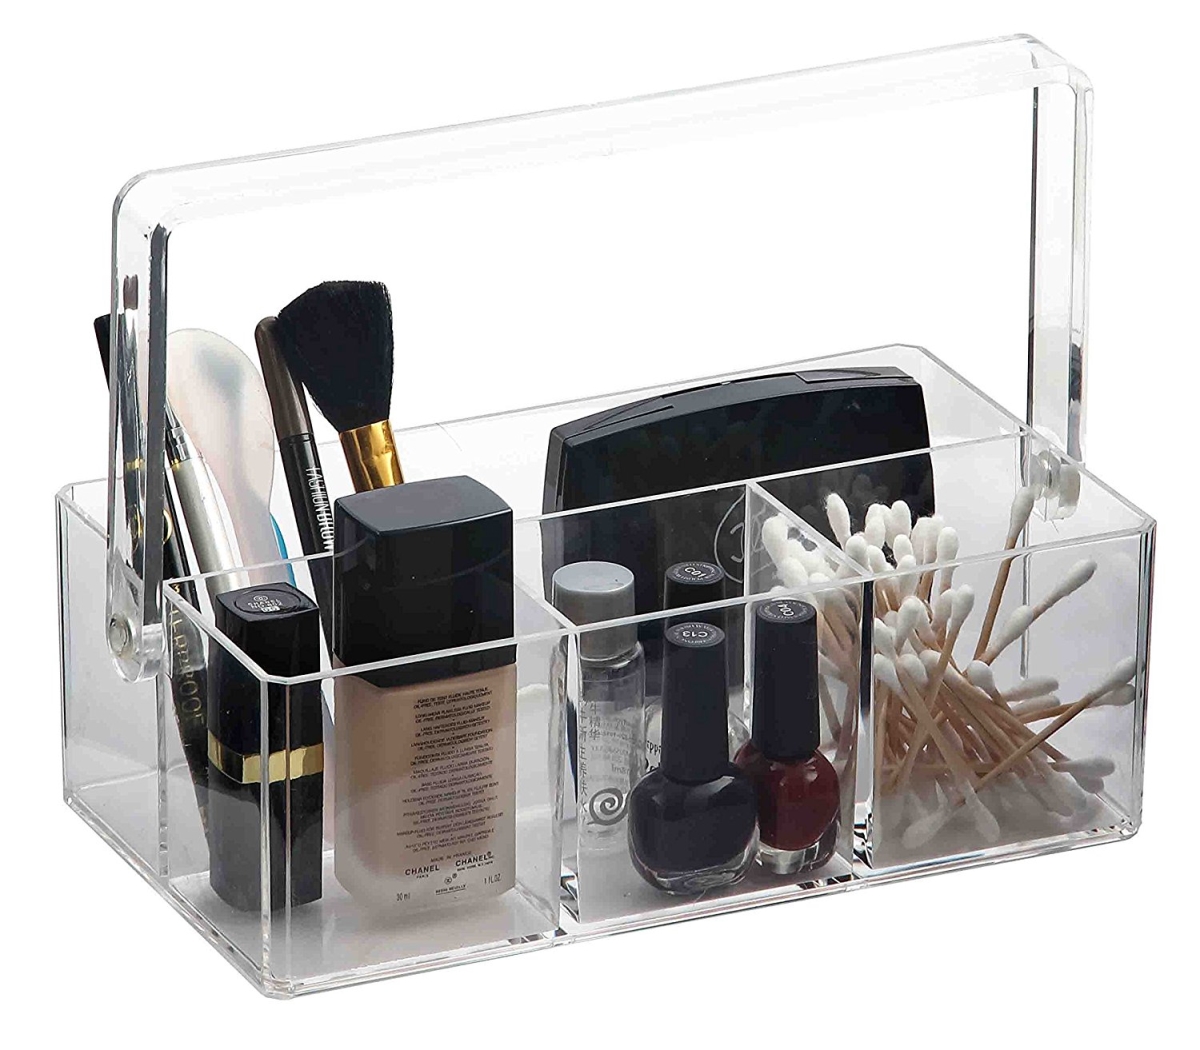 Mh49523 Clear Plastic Makeup Jewelry Organizer Tray - Holder With Handle